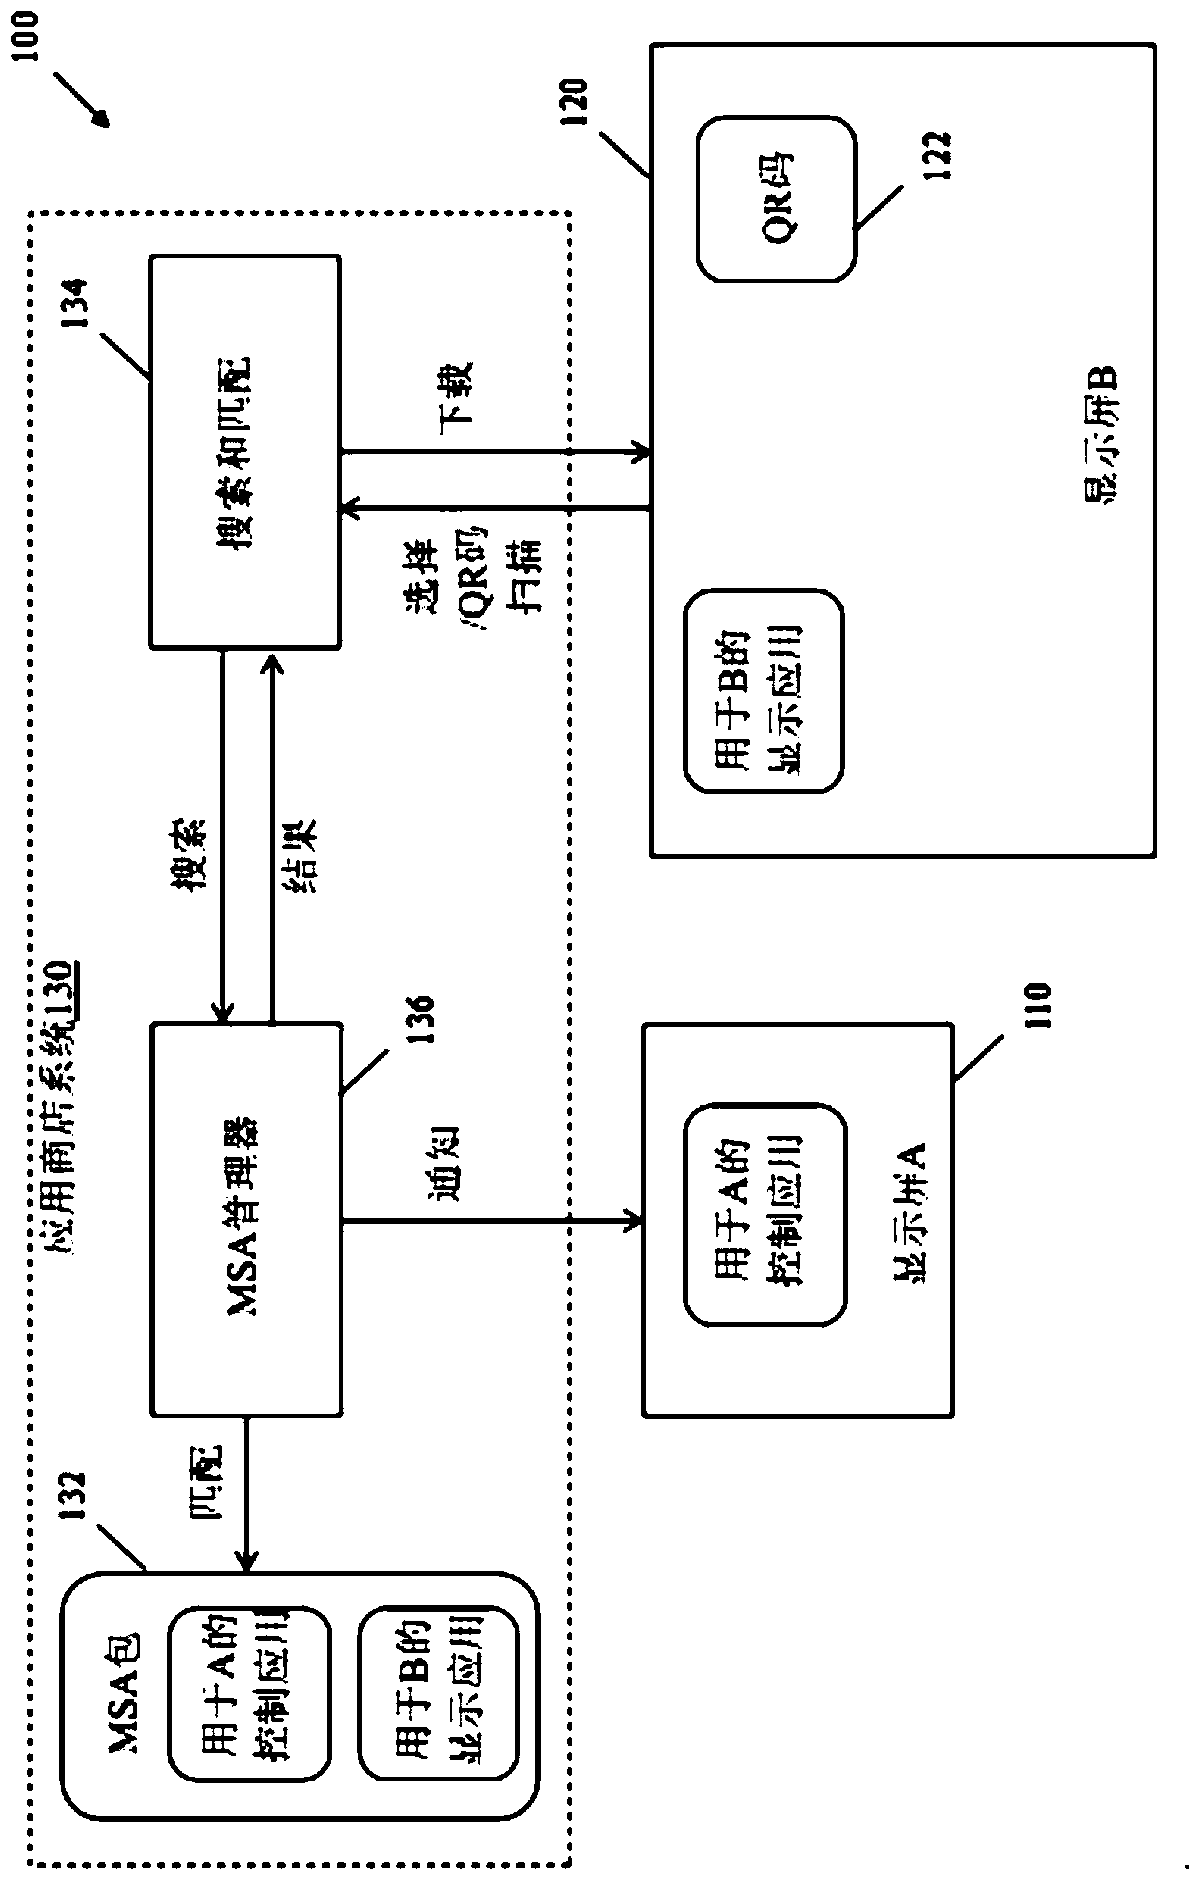 Multi-screen application enablement and distribution service